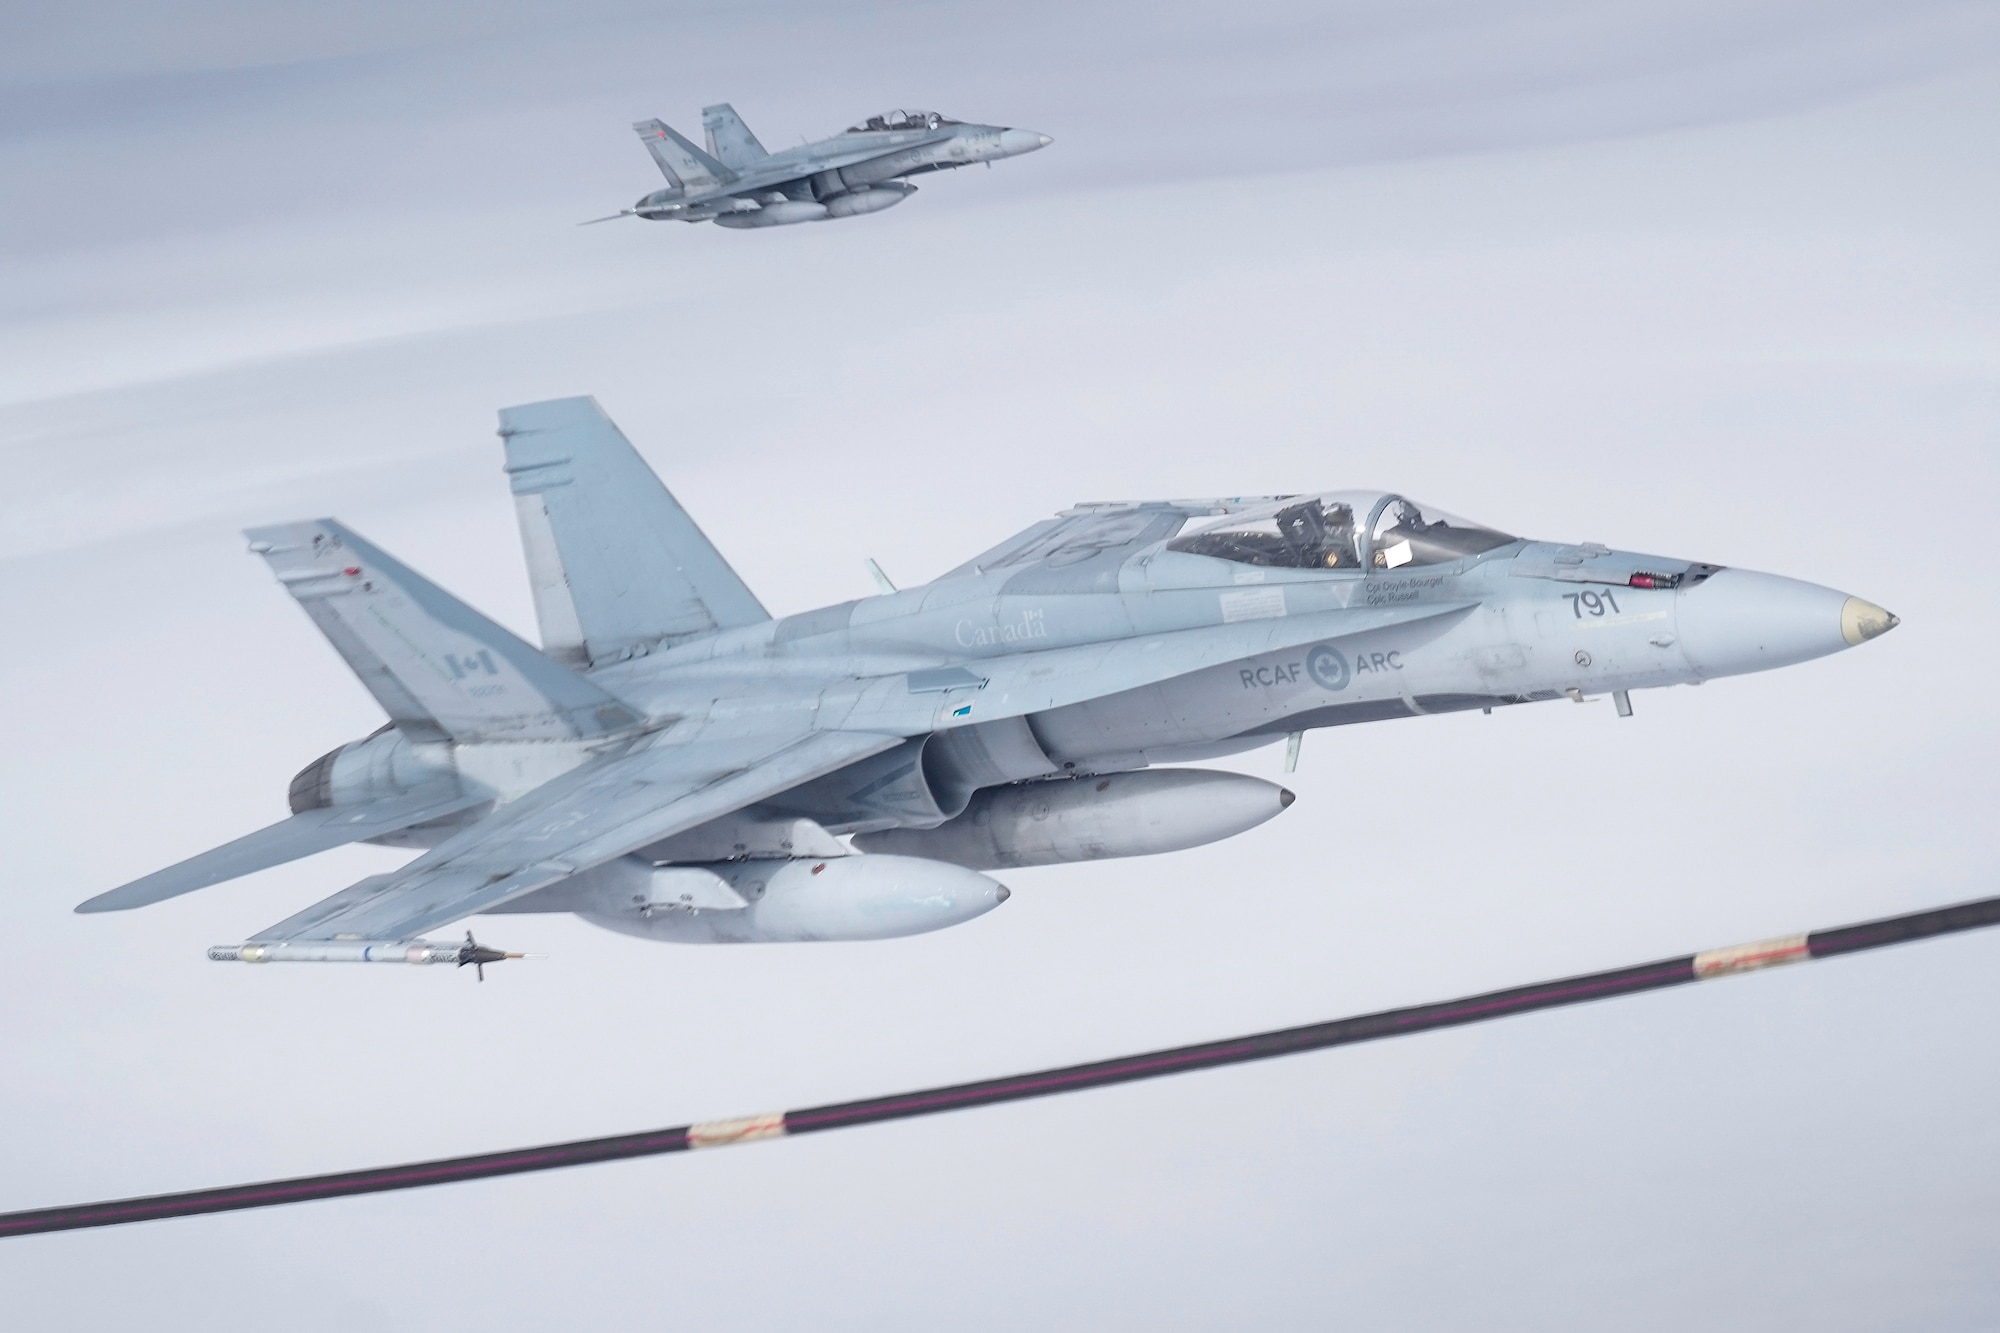 Two Royal Canadian Air Force CF-18 Hornets pull up to a CC-150 Polaris refueling tanker as RCAF Airmen assigned to the 437th Transport Squadron based out of Canadian Forces Base Trenton, Canada, perform refueling operations in training airspace over Alaska during the Red Flag-Alaska 19-3 exercise, Aug. 15, 2019. Red Flag-Alaska, a series of Pacific Air Forces commander-directed field training exercises for U.S. forces, provides joint offensive counter-air, interdiction, close air support, and large force employment training in a simulated combat environment.